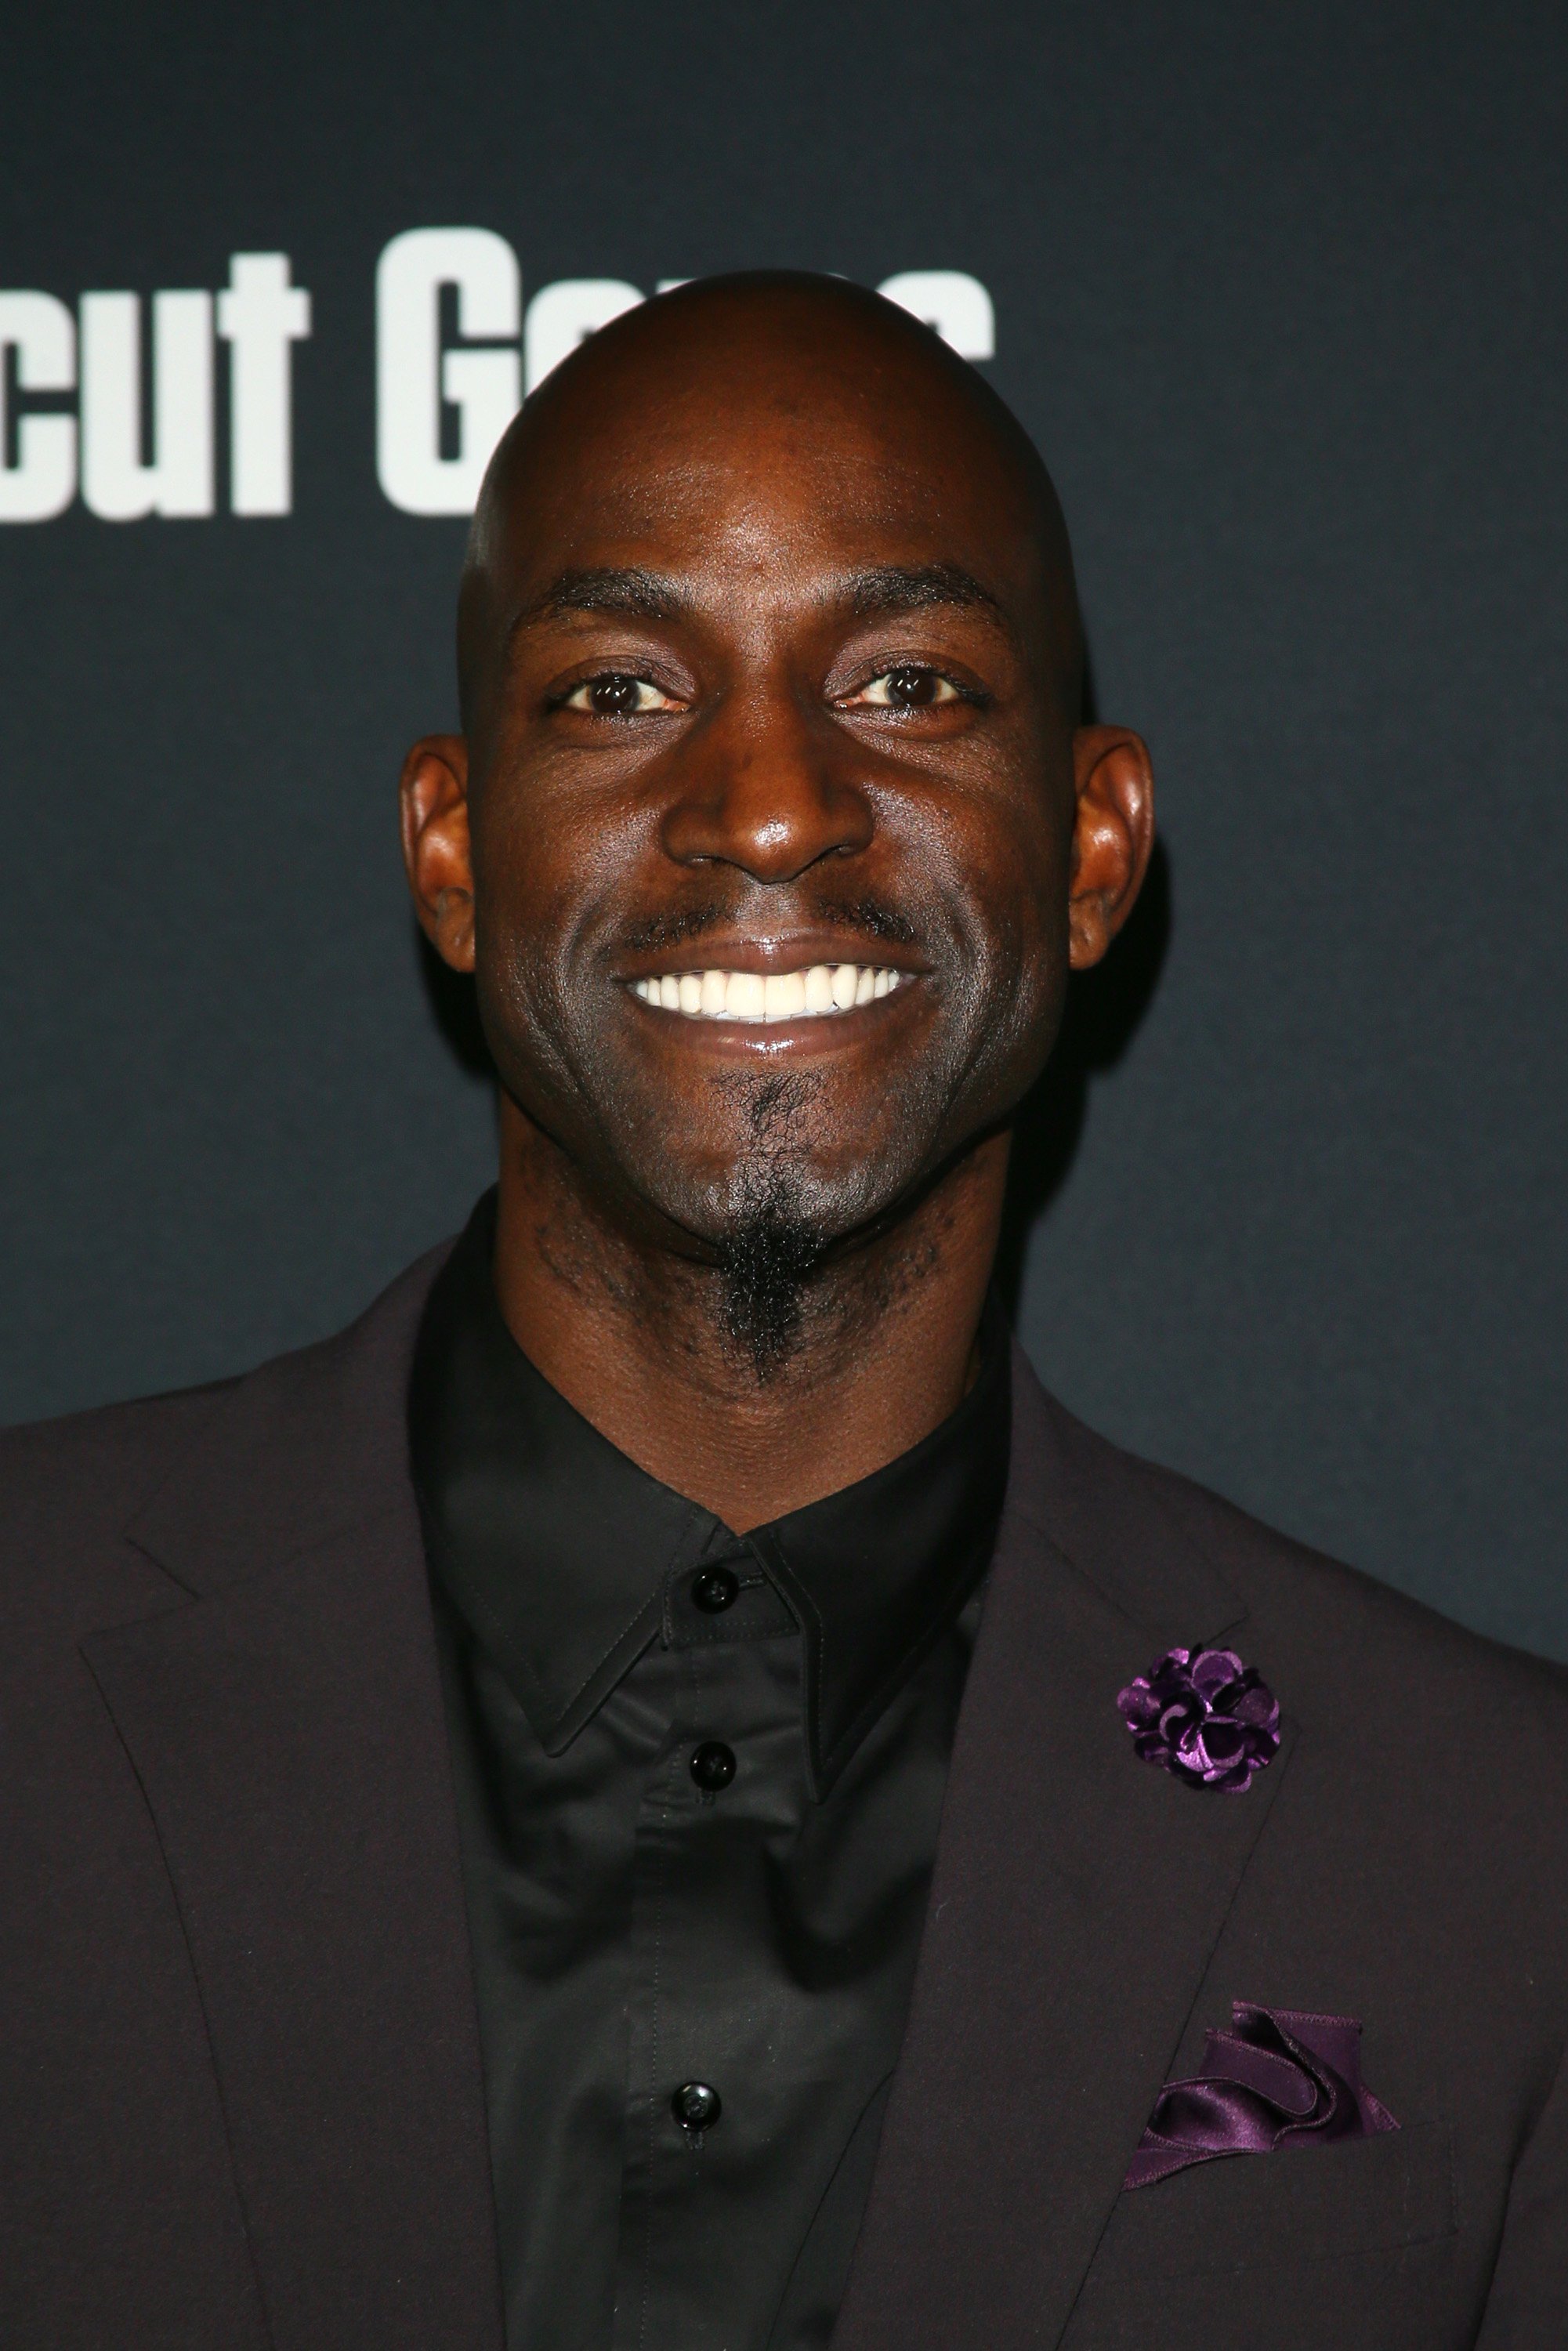 Kevin Garnett at the premiere of A24's "Uncut Gems" on December 11, 2019. | Source: Getty Images